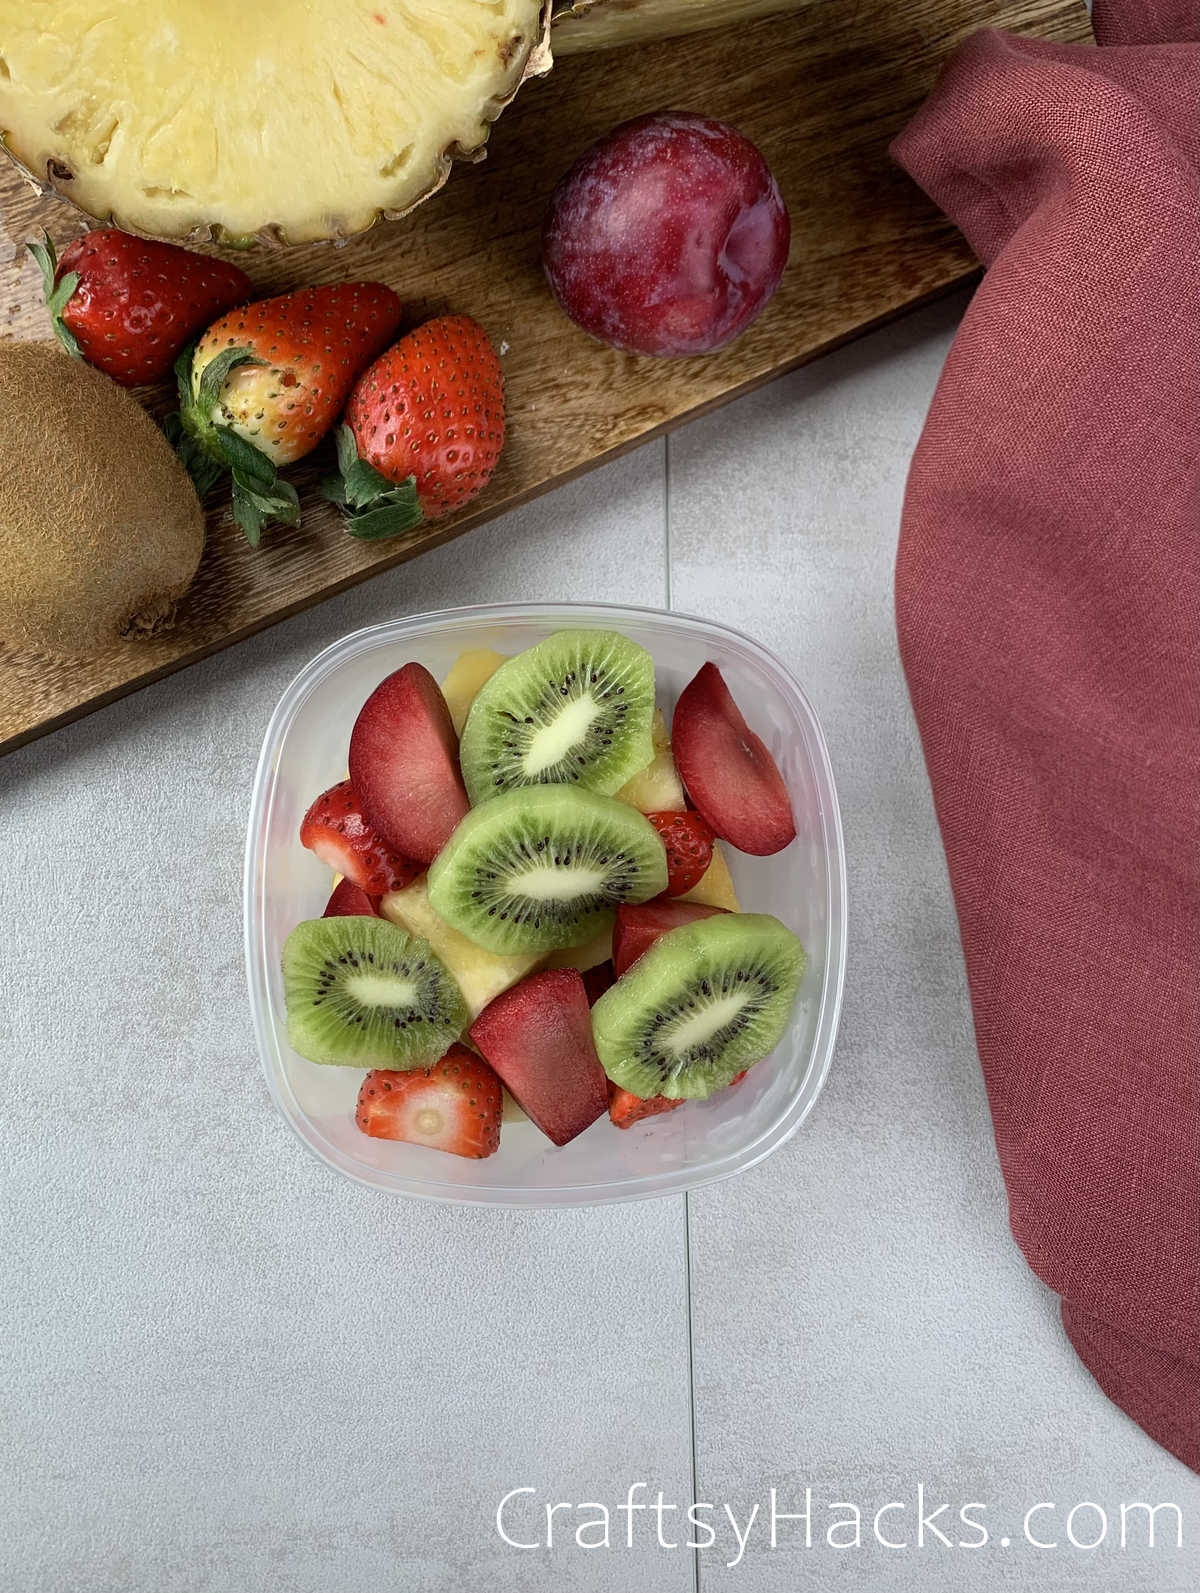 store cut fruits in air tight container